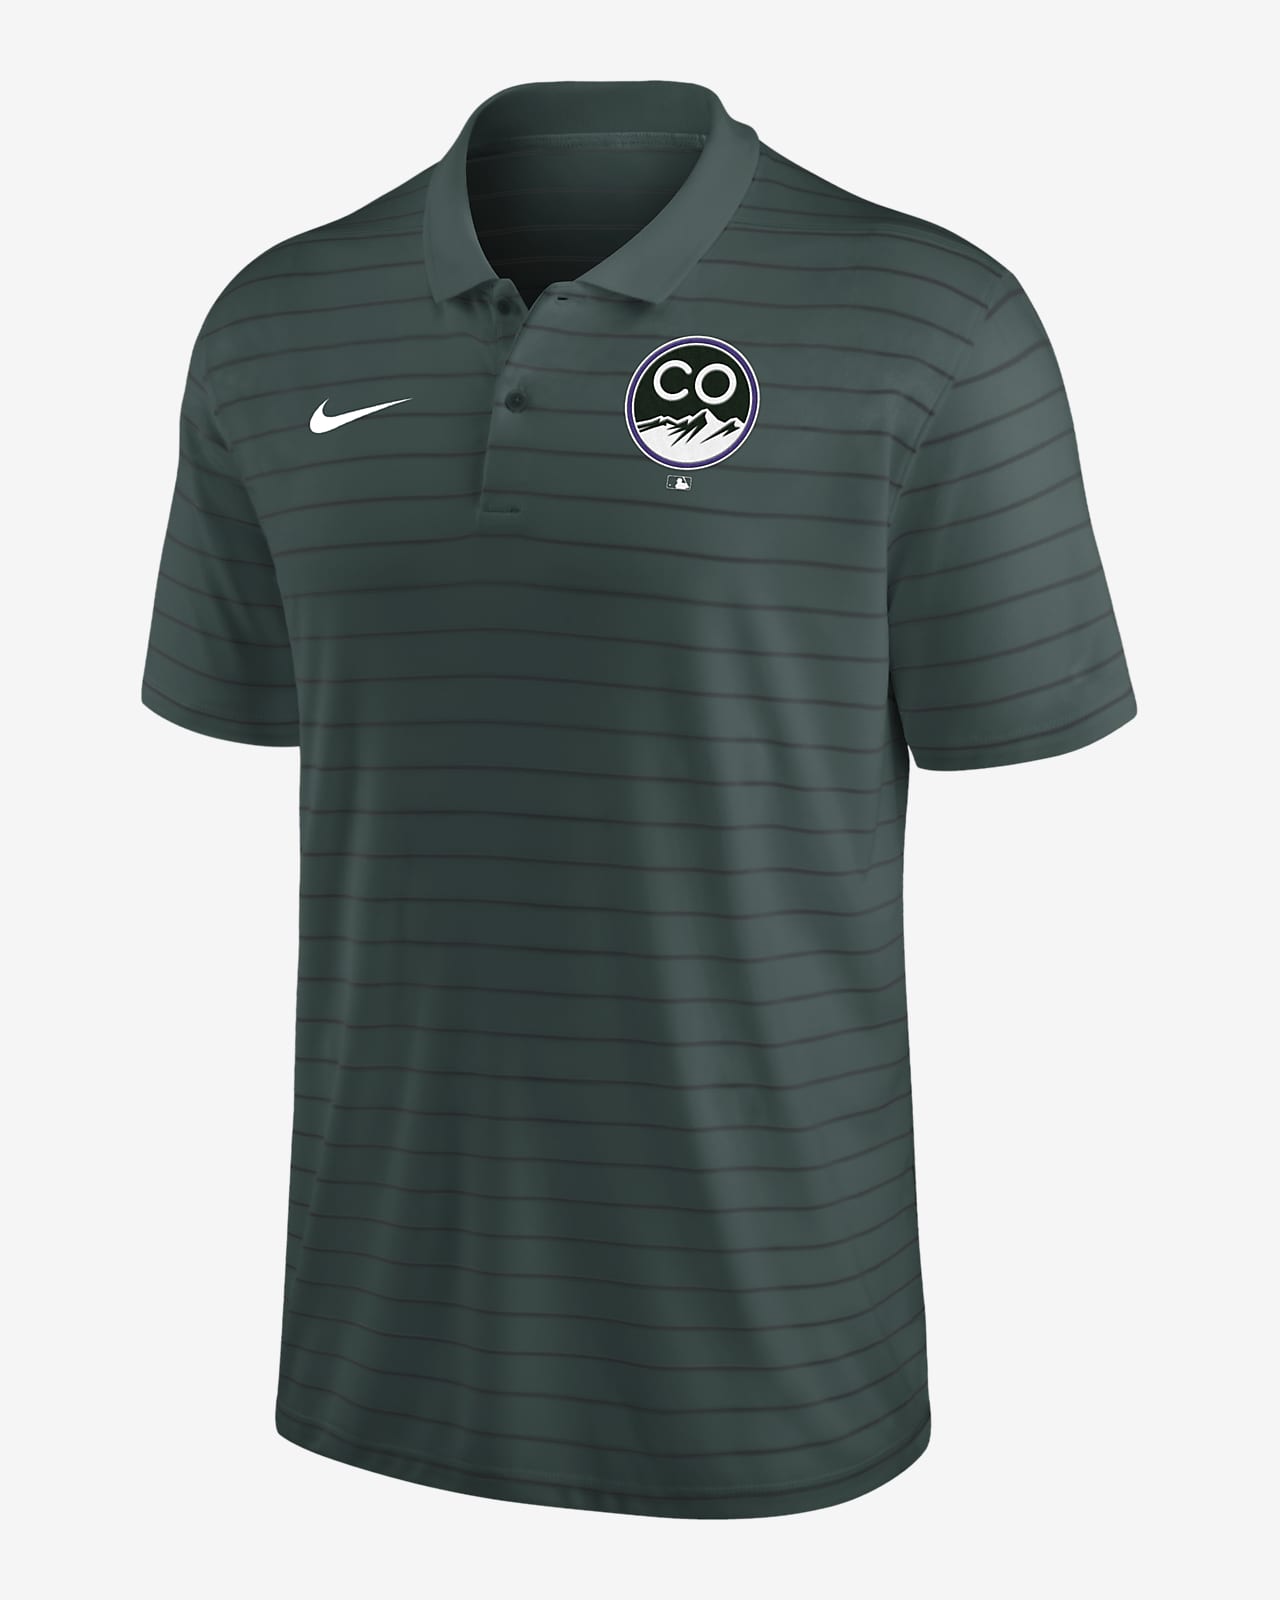 Order your Colorado Rockies City Connect Nike gear now